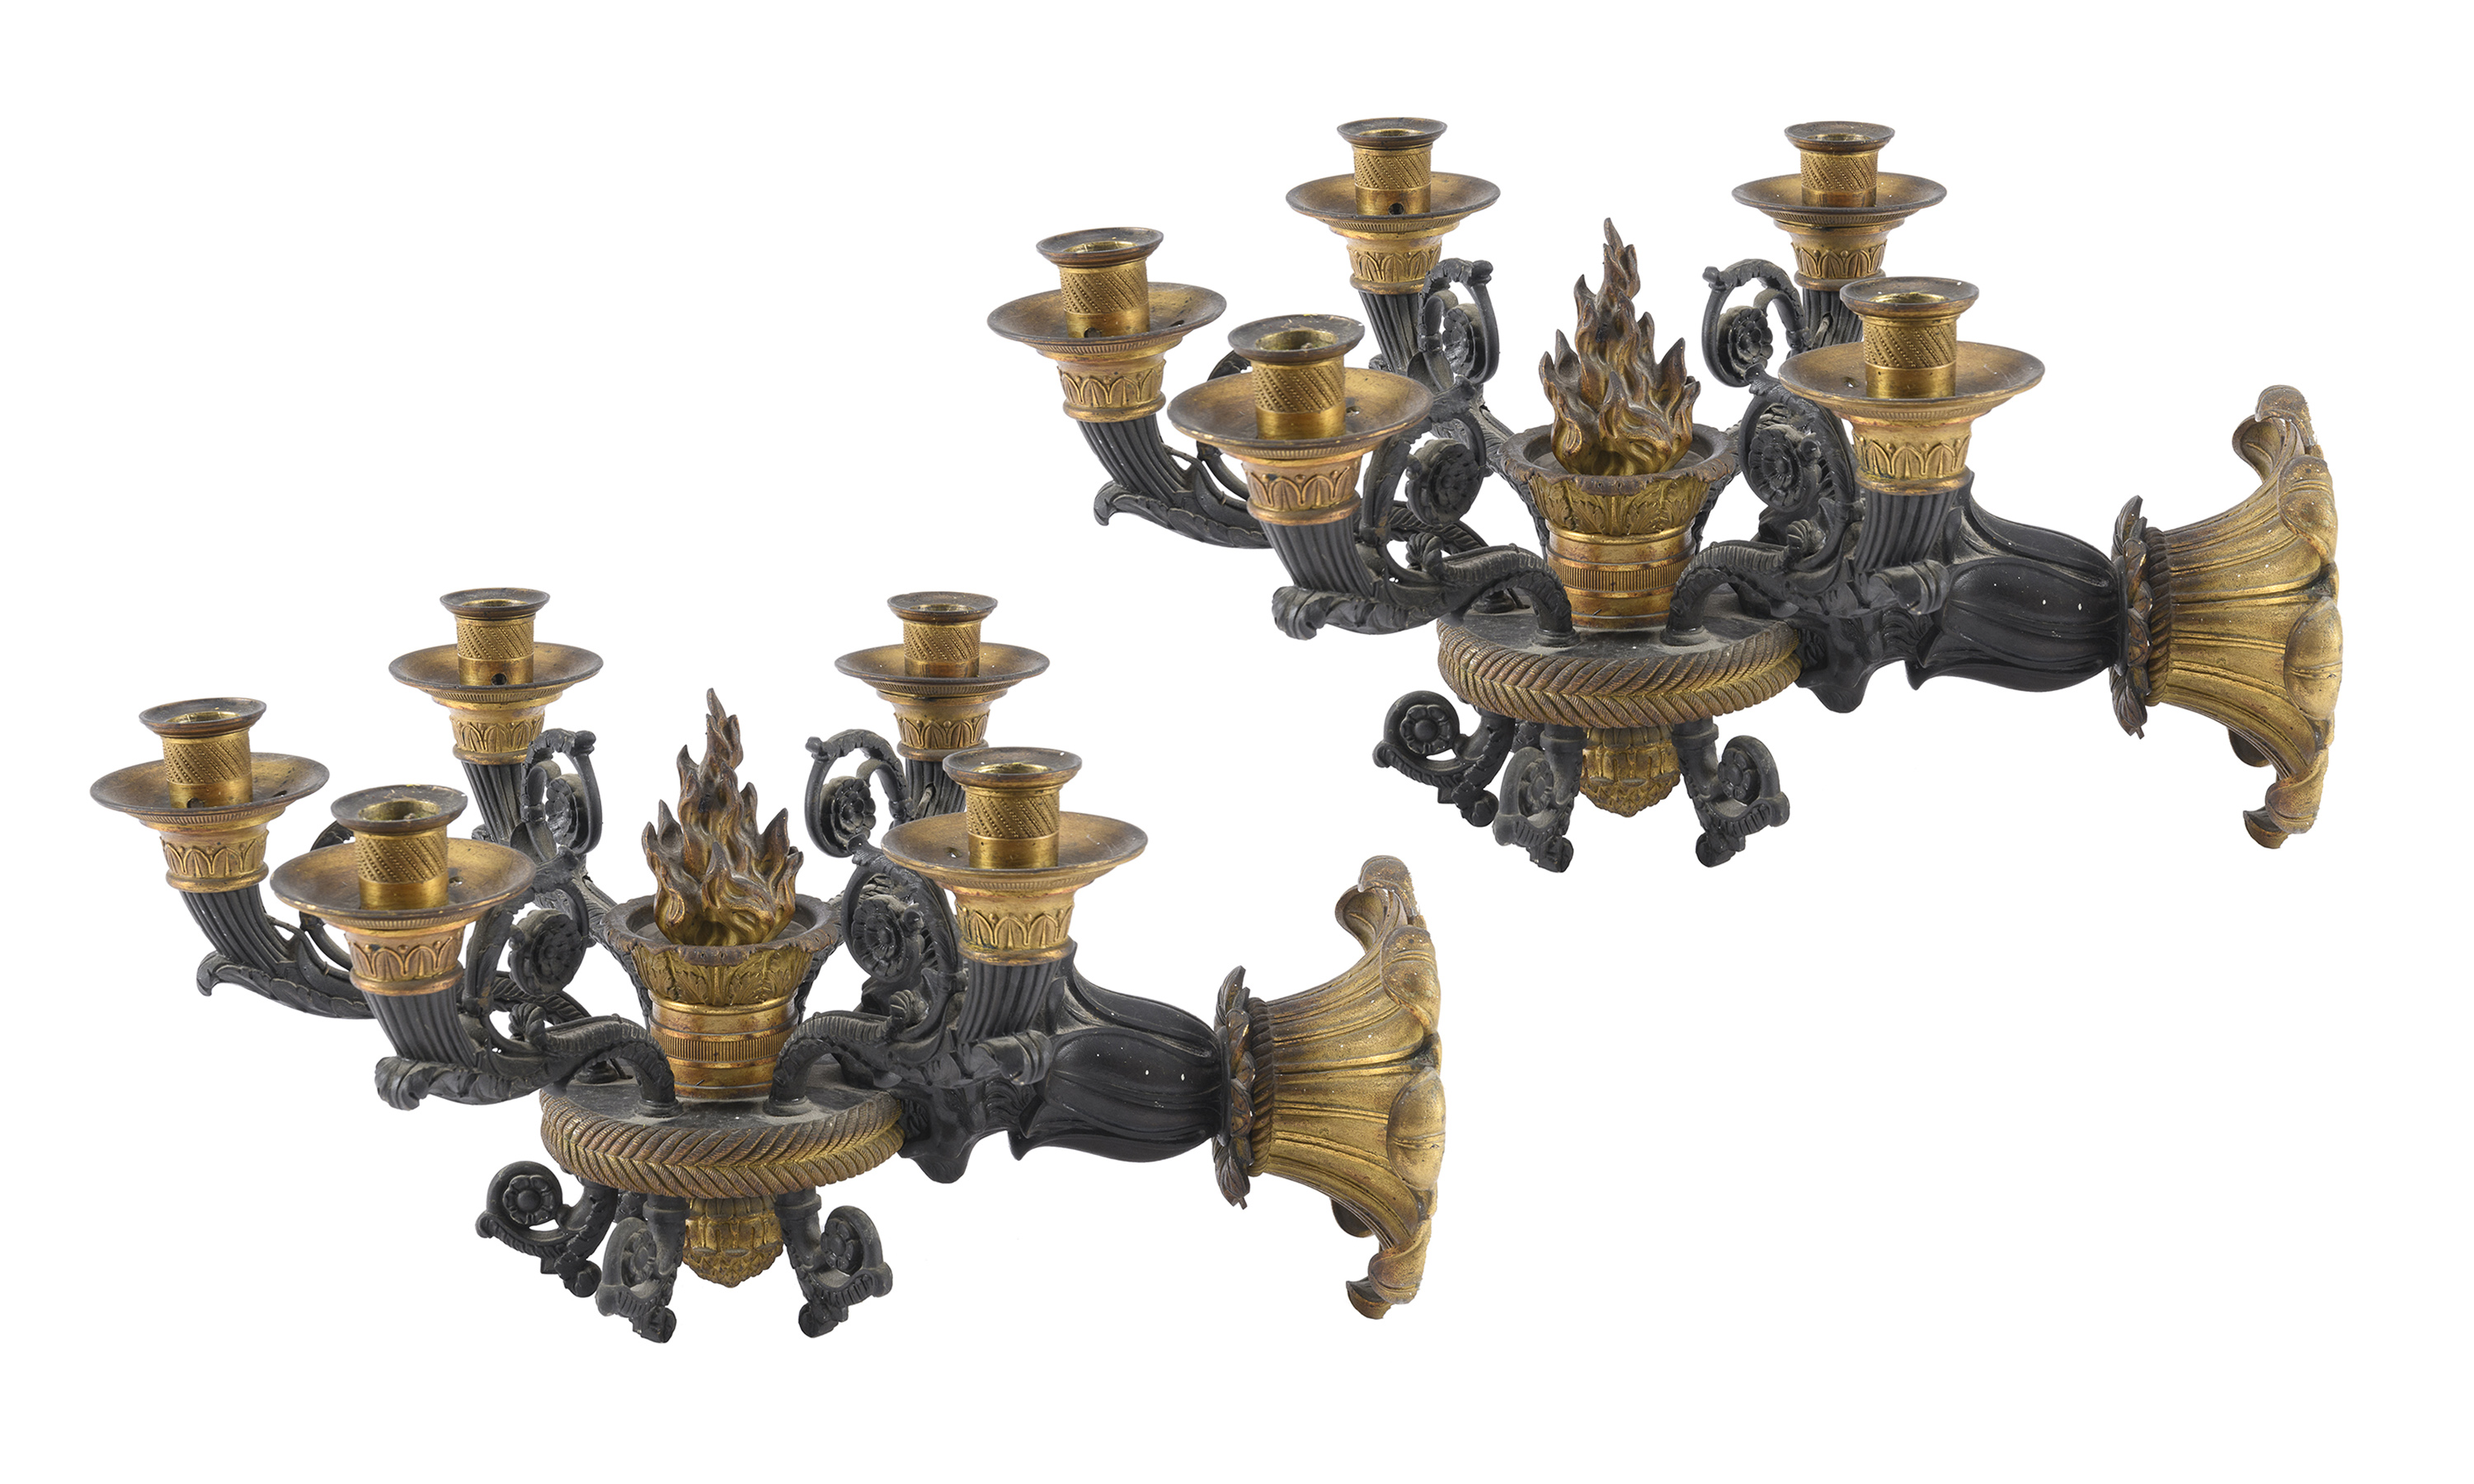 PAIR OF BRONZE WALL LIGHTS EARLY 19th CENTURY